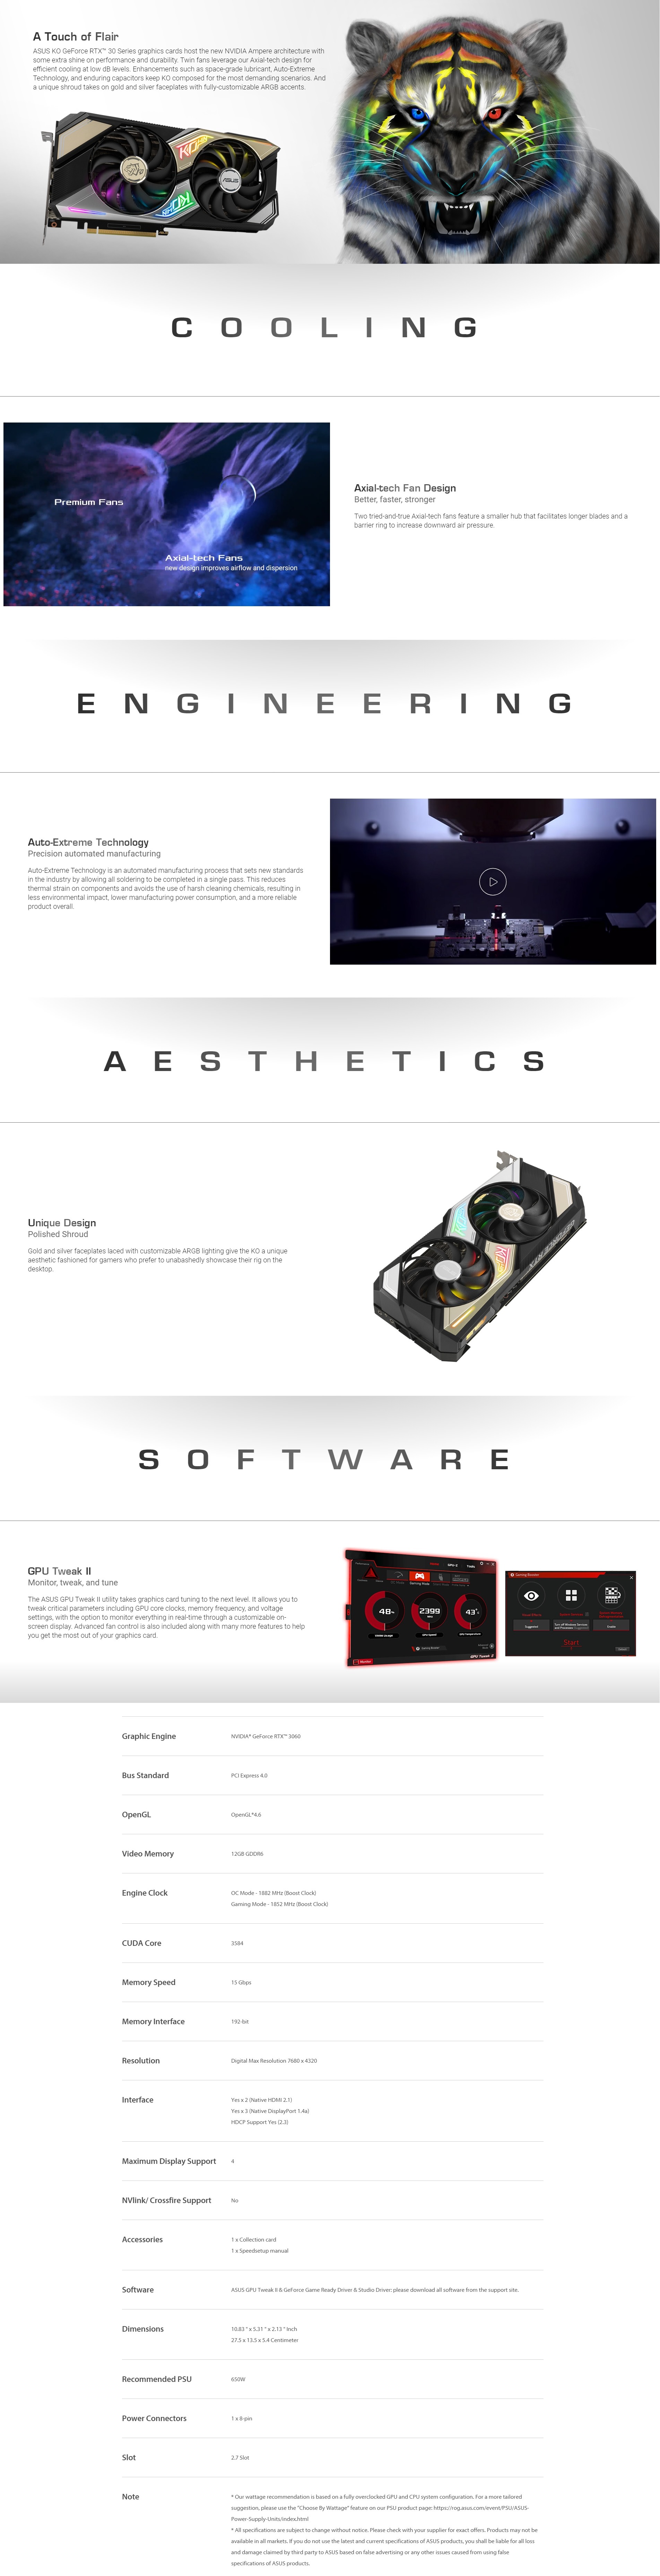 A large marketing image providing additional information about the product ASUS GeForce RTX 3060 KO OC 12GB GDDR6 LHR - Additional alt info not provided